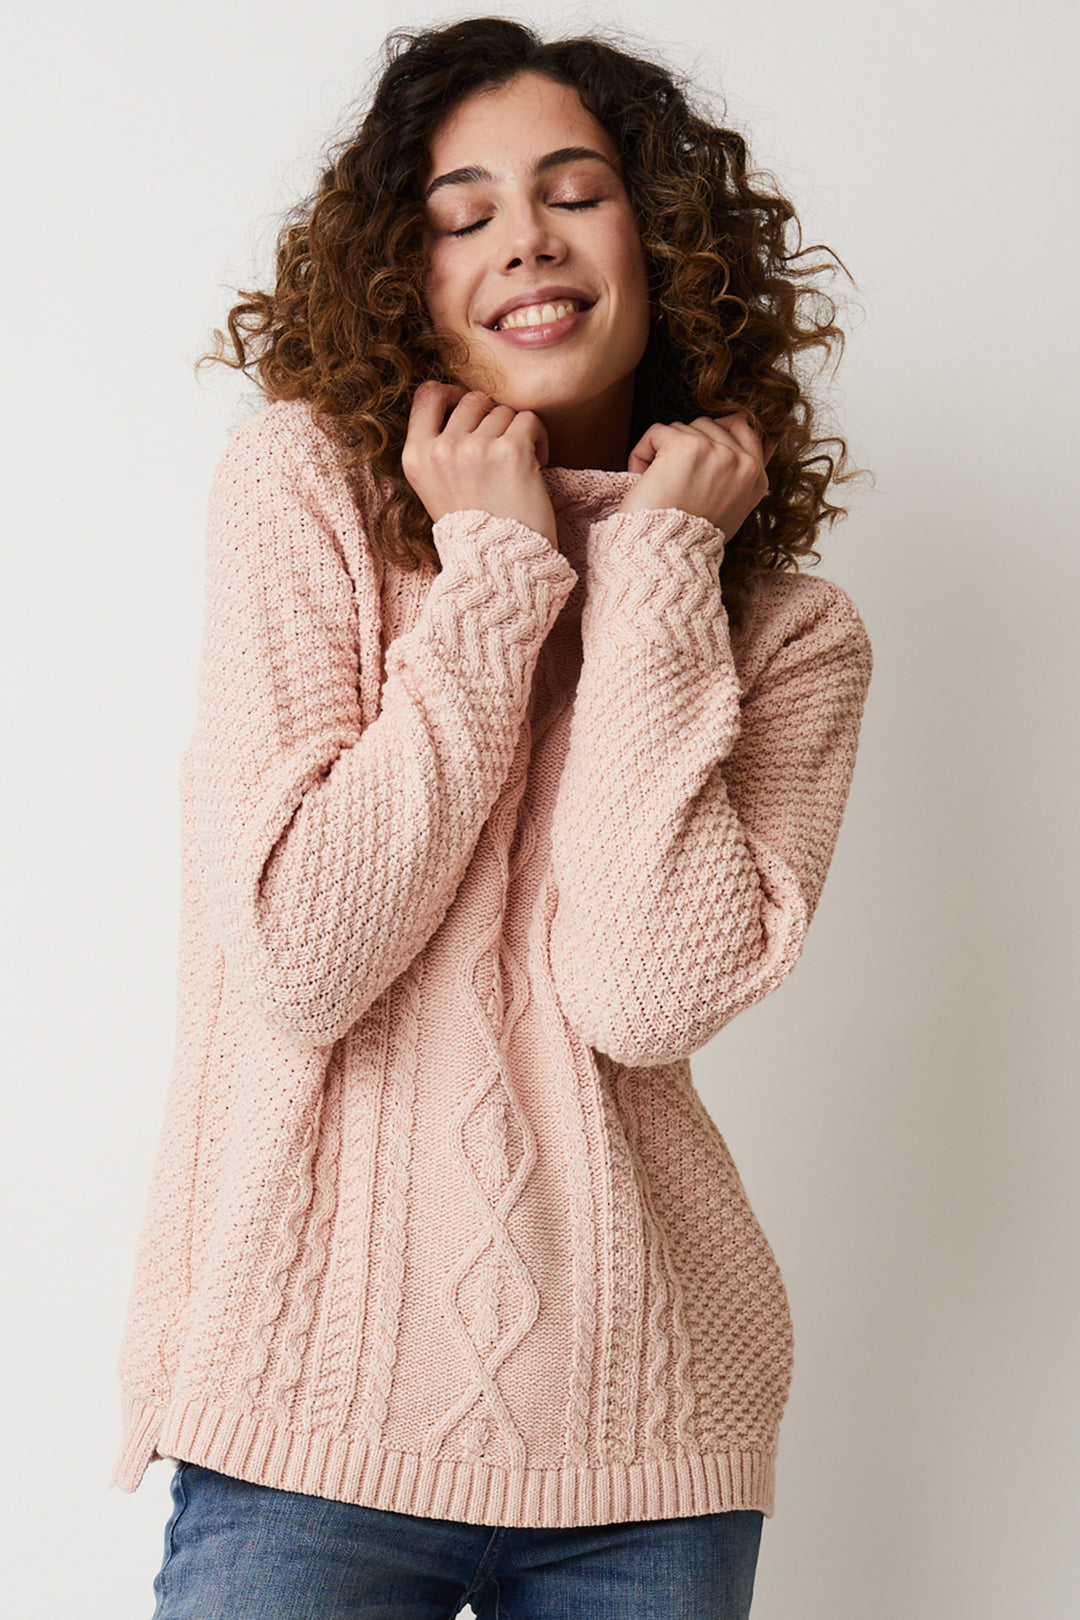 Its funnel neckline and long sleeves are intricately designed with cable knit for added elegance and warmth.